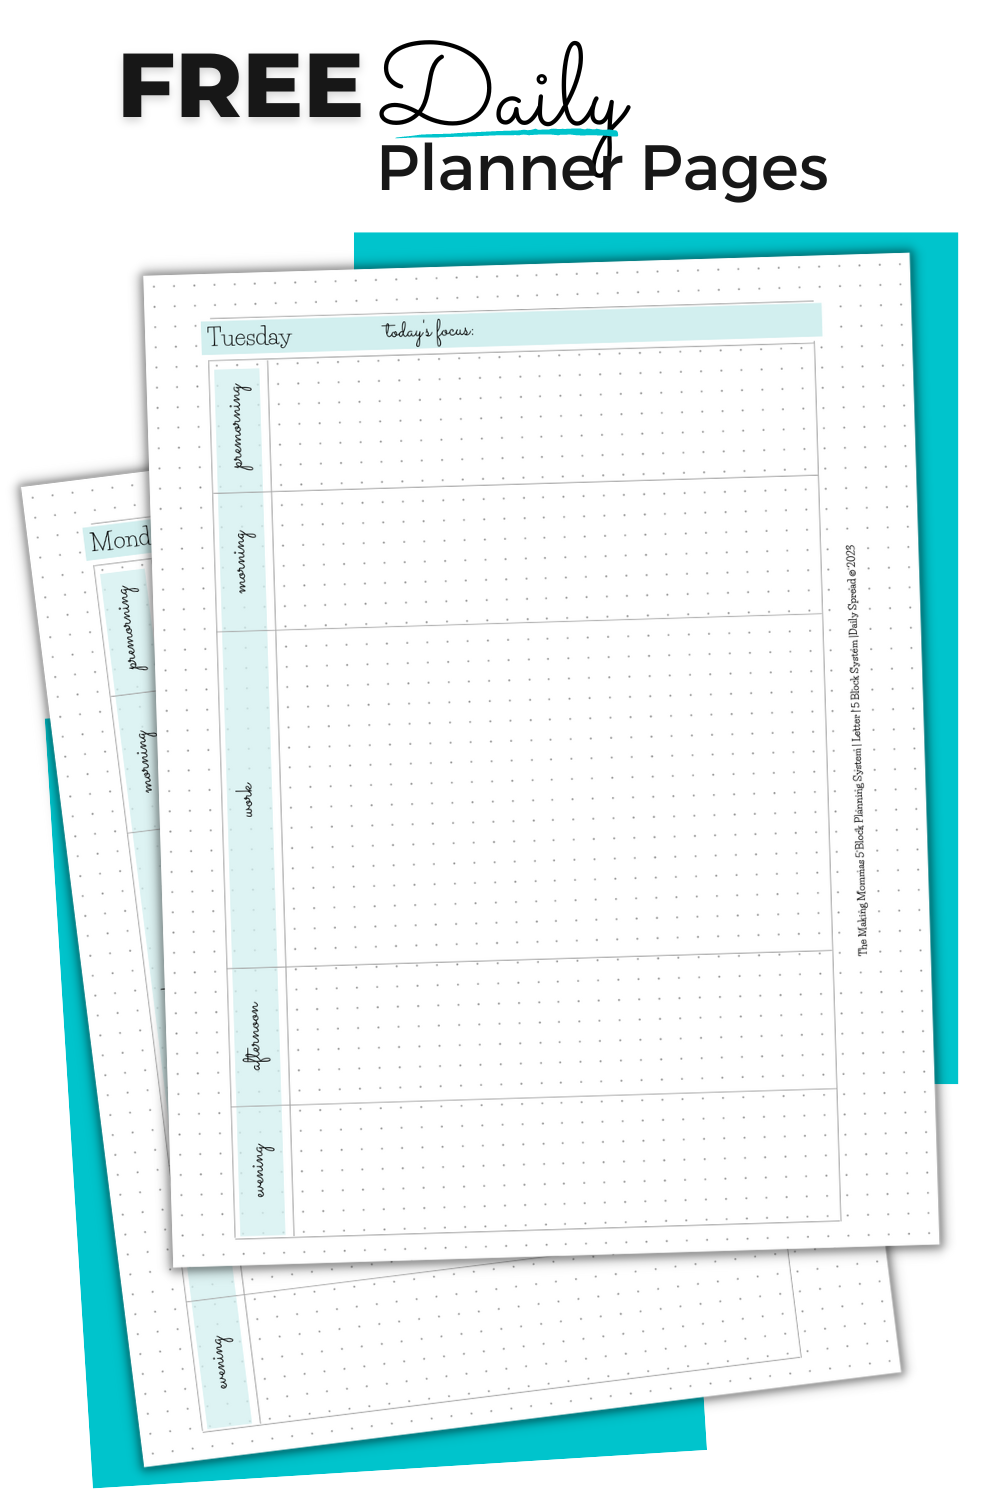 pin of free daily planner pages